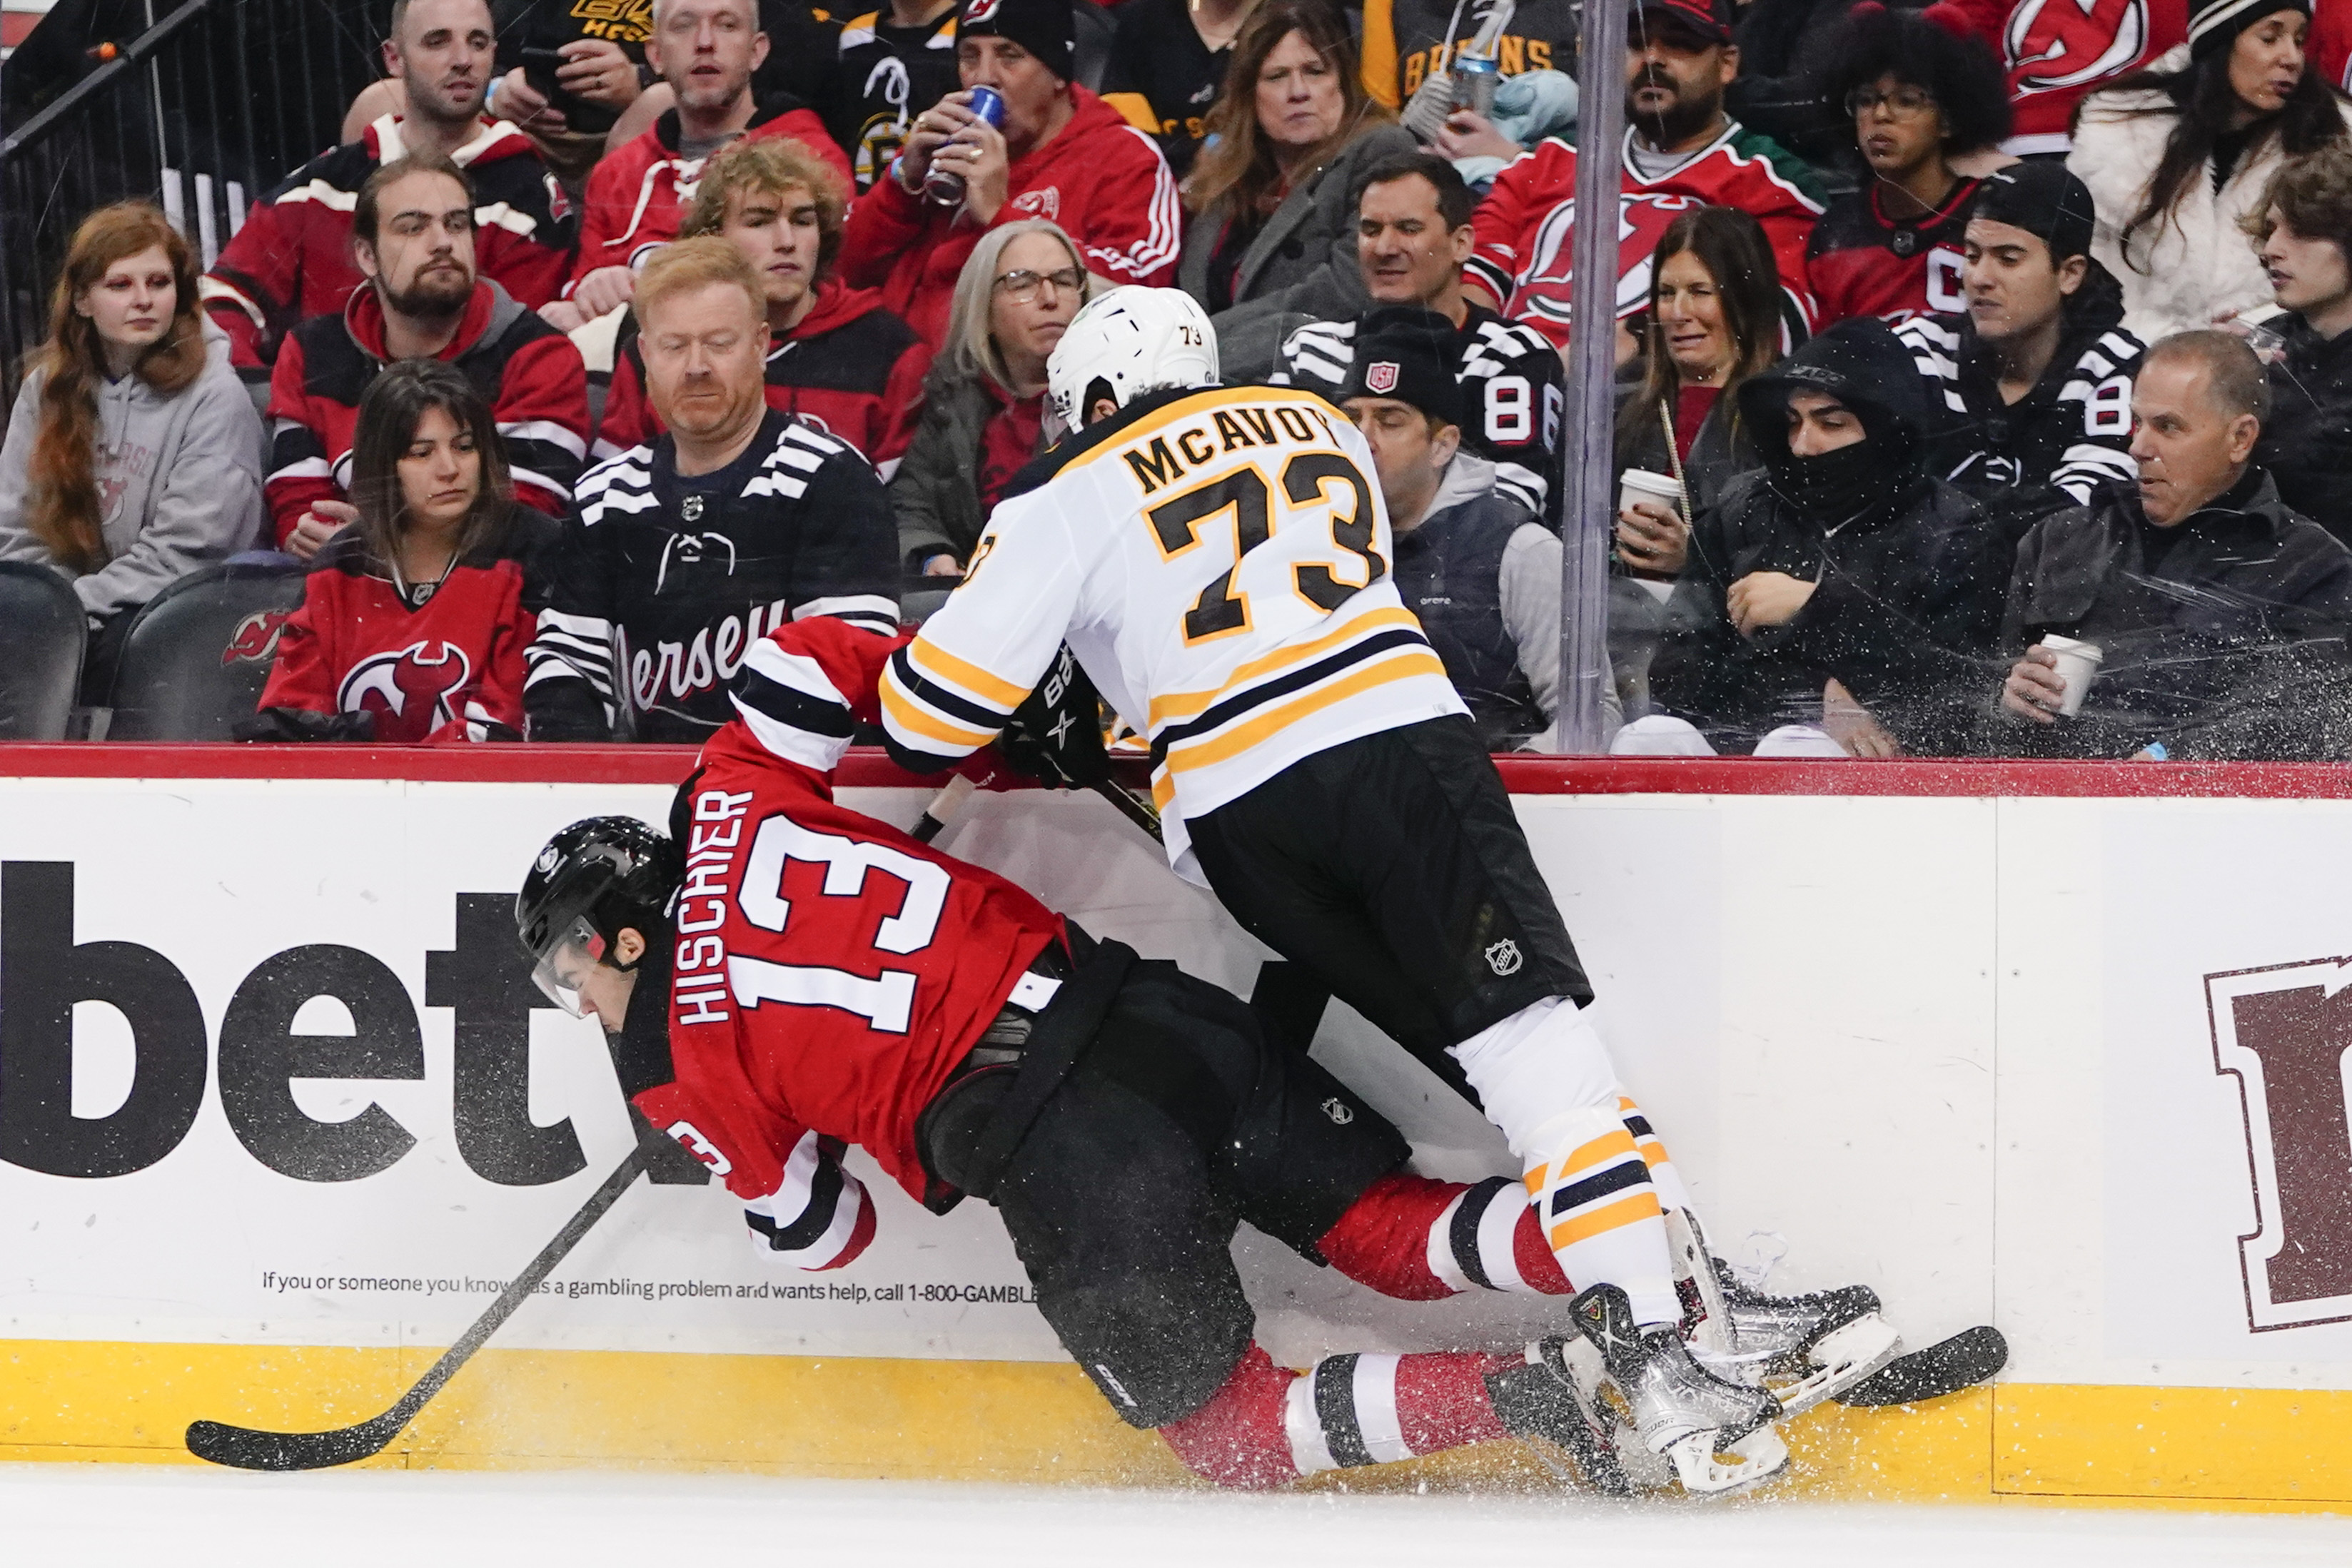 Trent frederics meanacing one punch knock out #bruins #boston